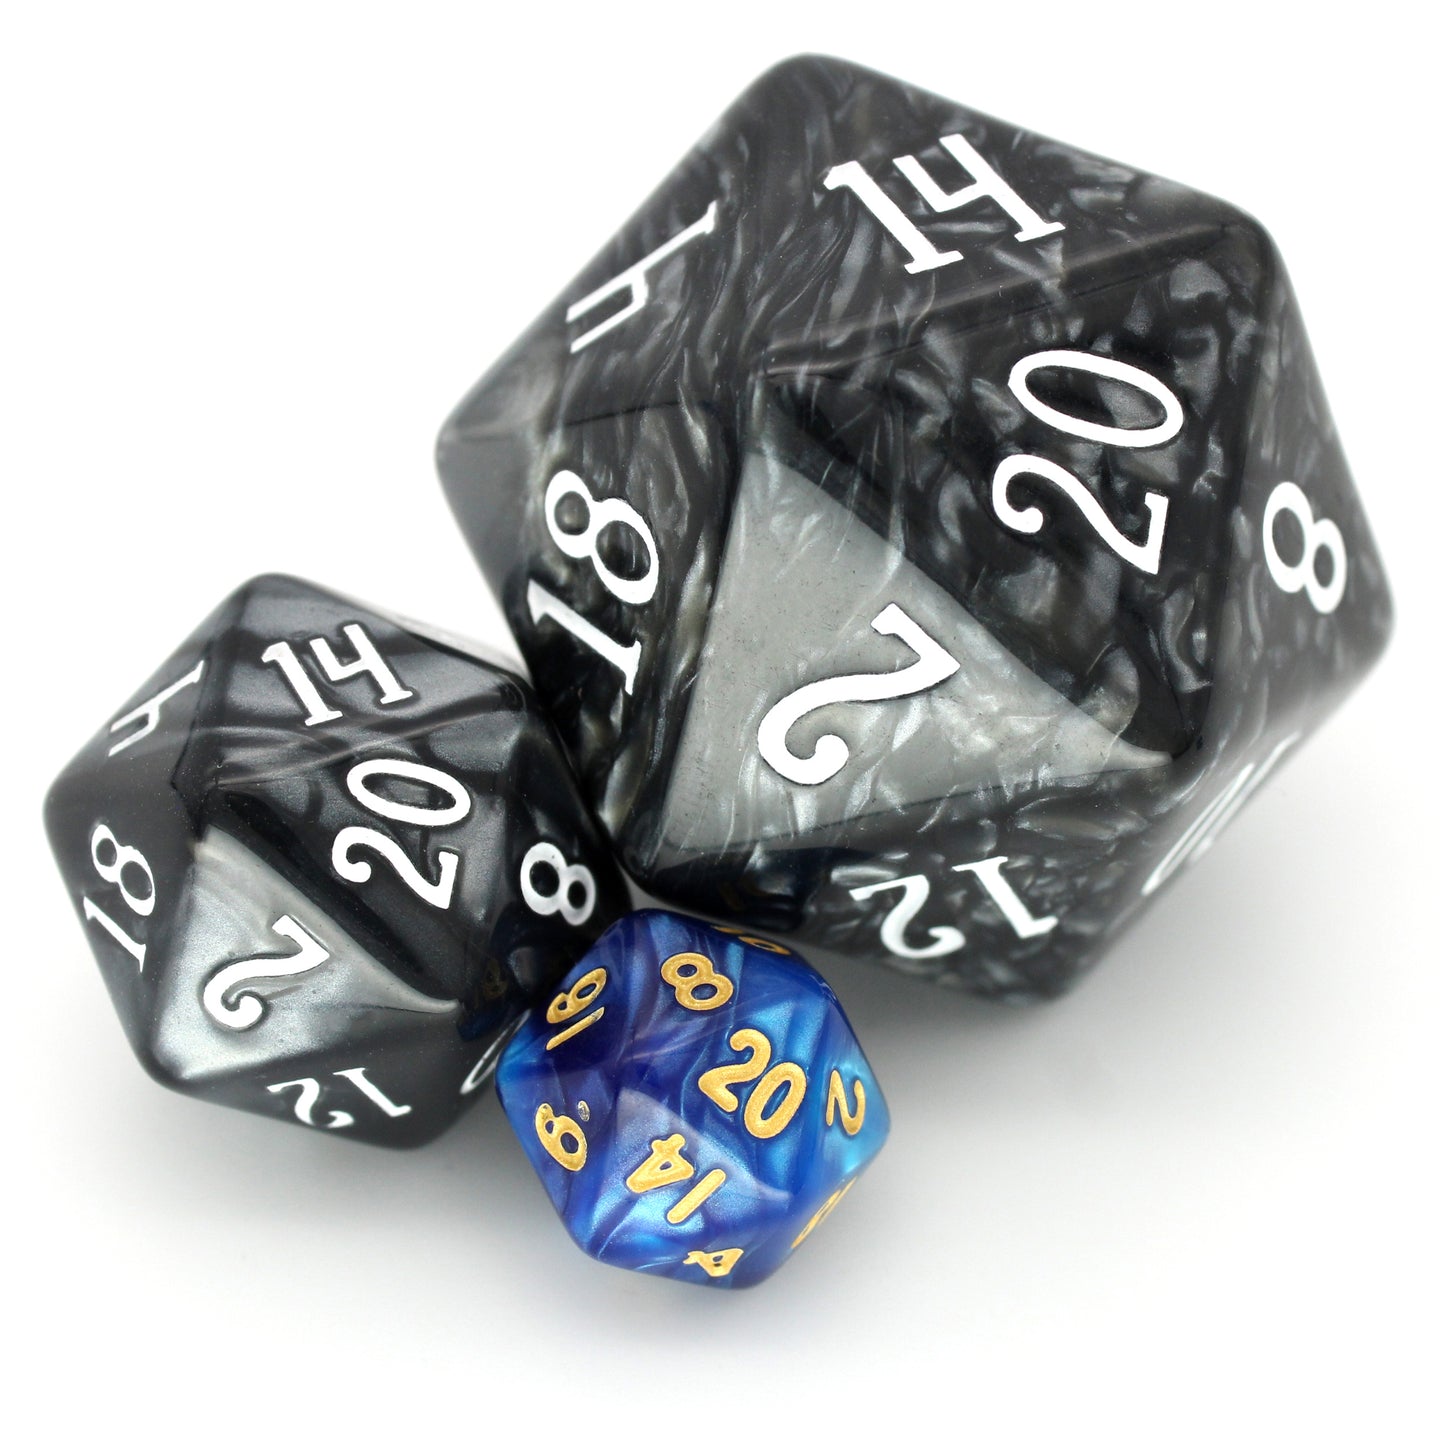 Mblue is a 7-piece 13mm resin dice set with shimmering waves of pearlescent blue, inked in pale gold. It belongs to our tiny but mighty Wee Lads collection.